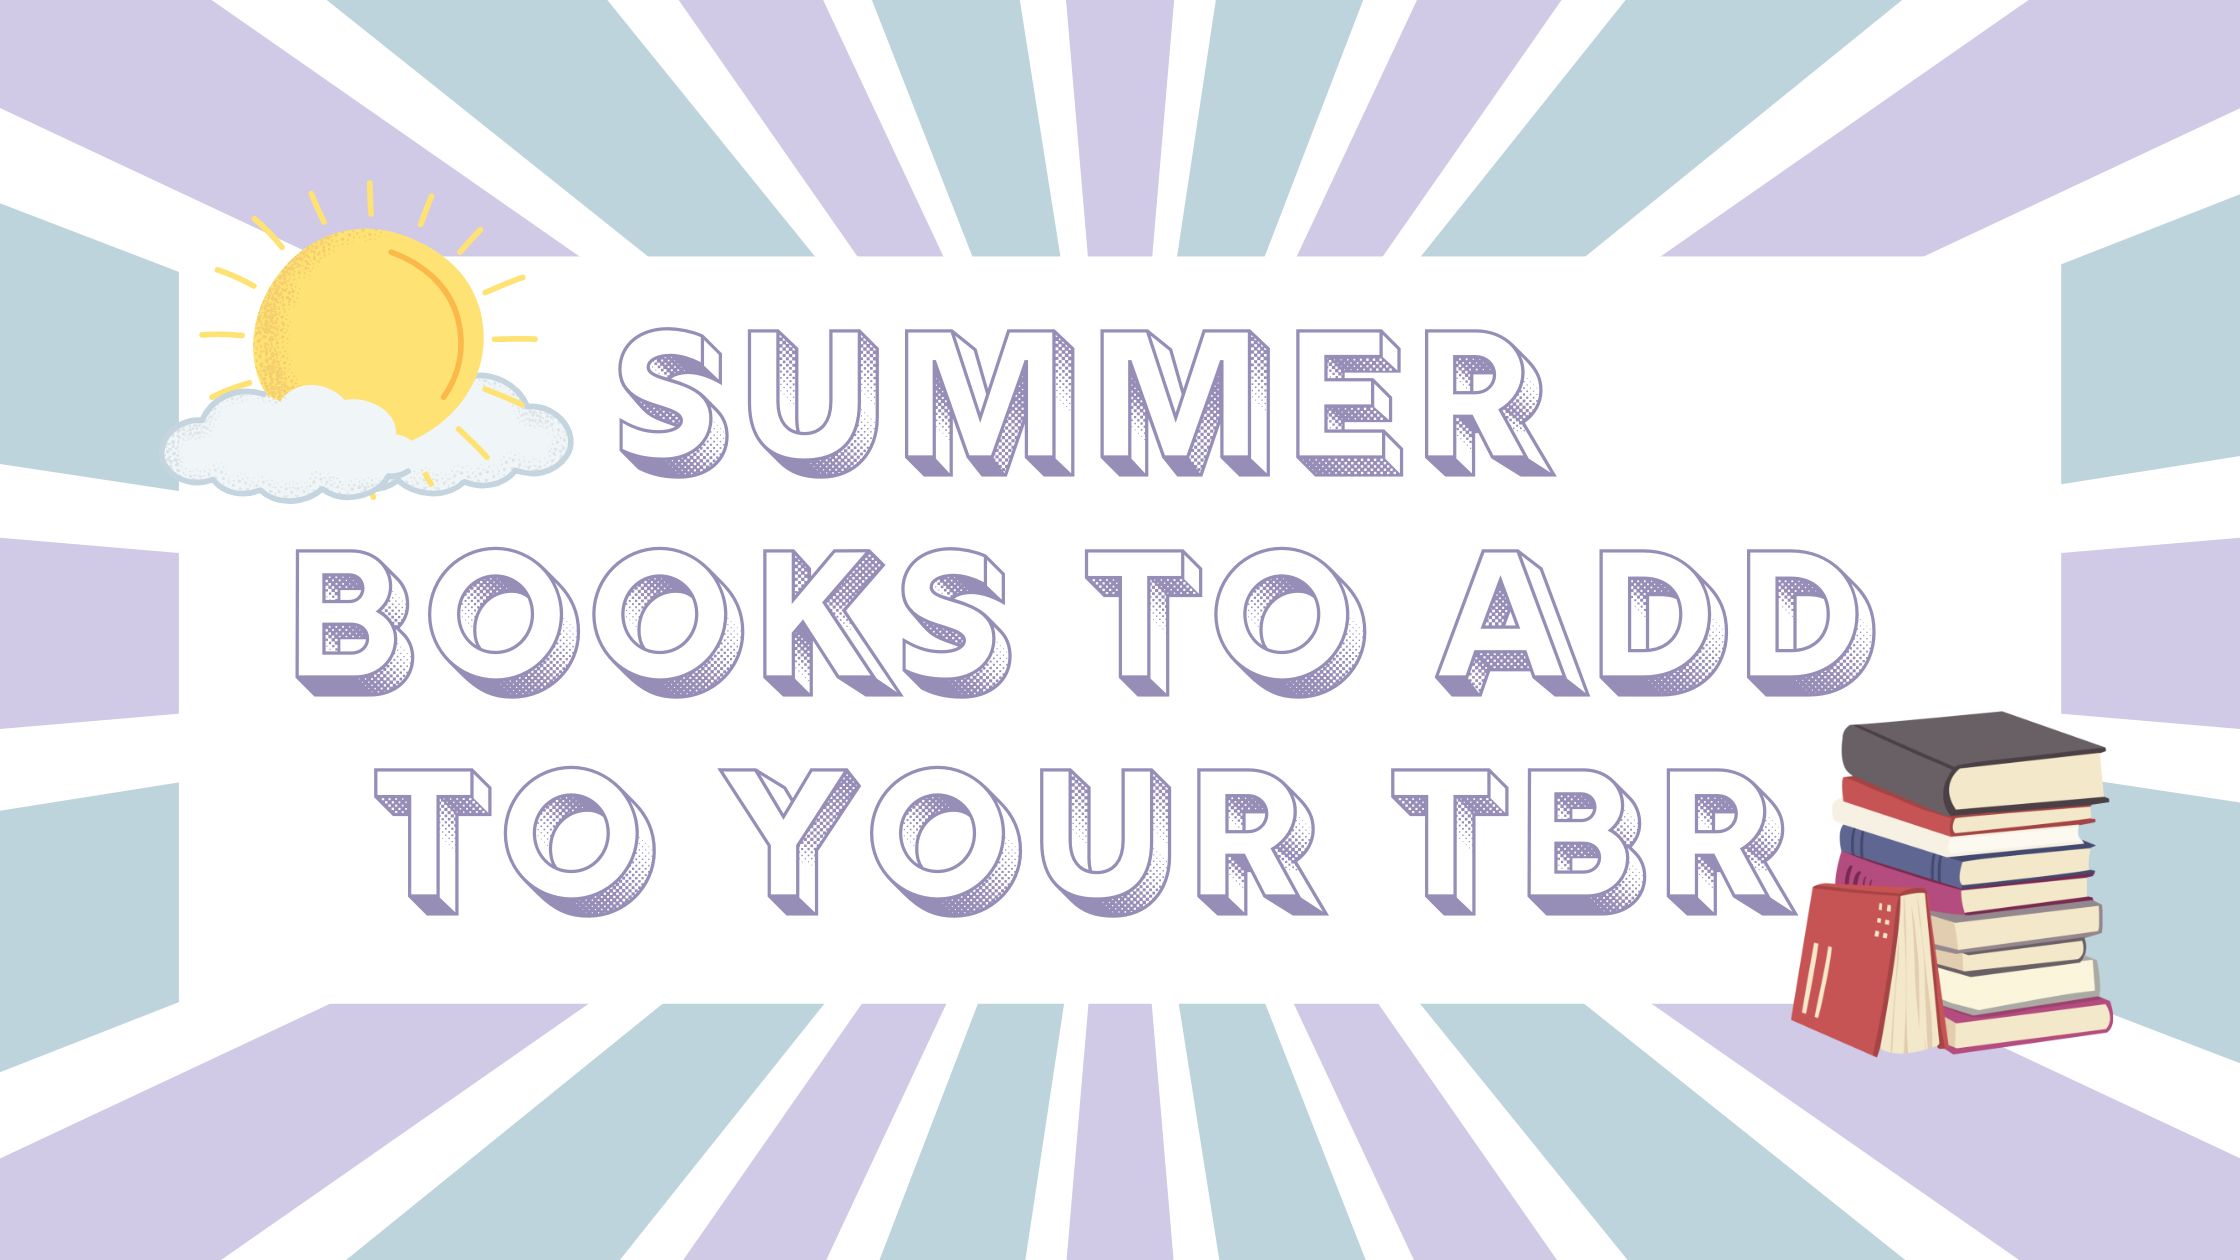 Summer books to add to your TBR